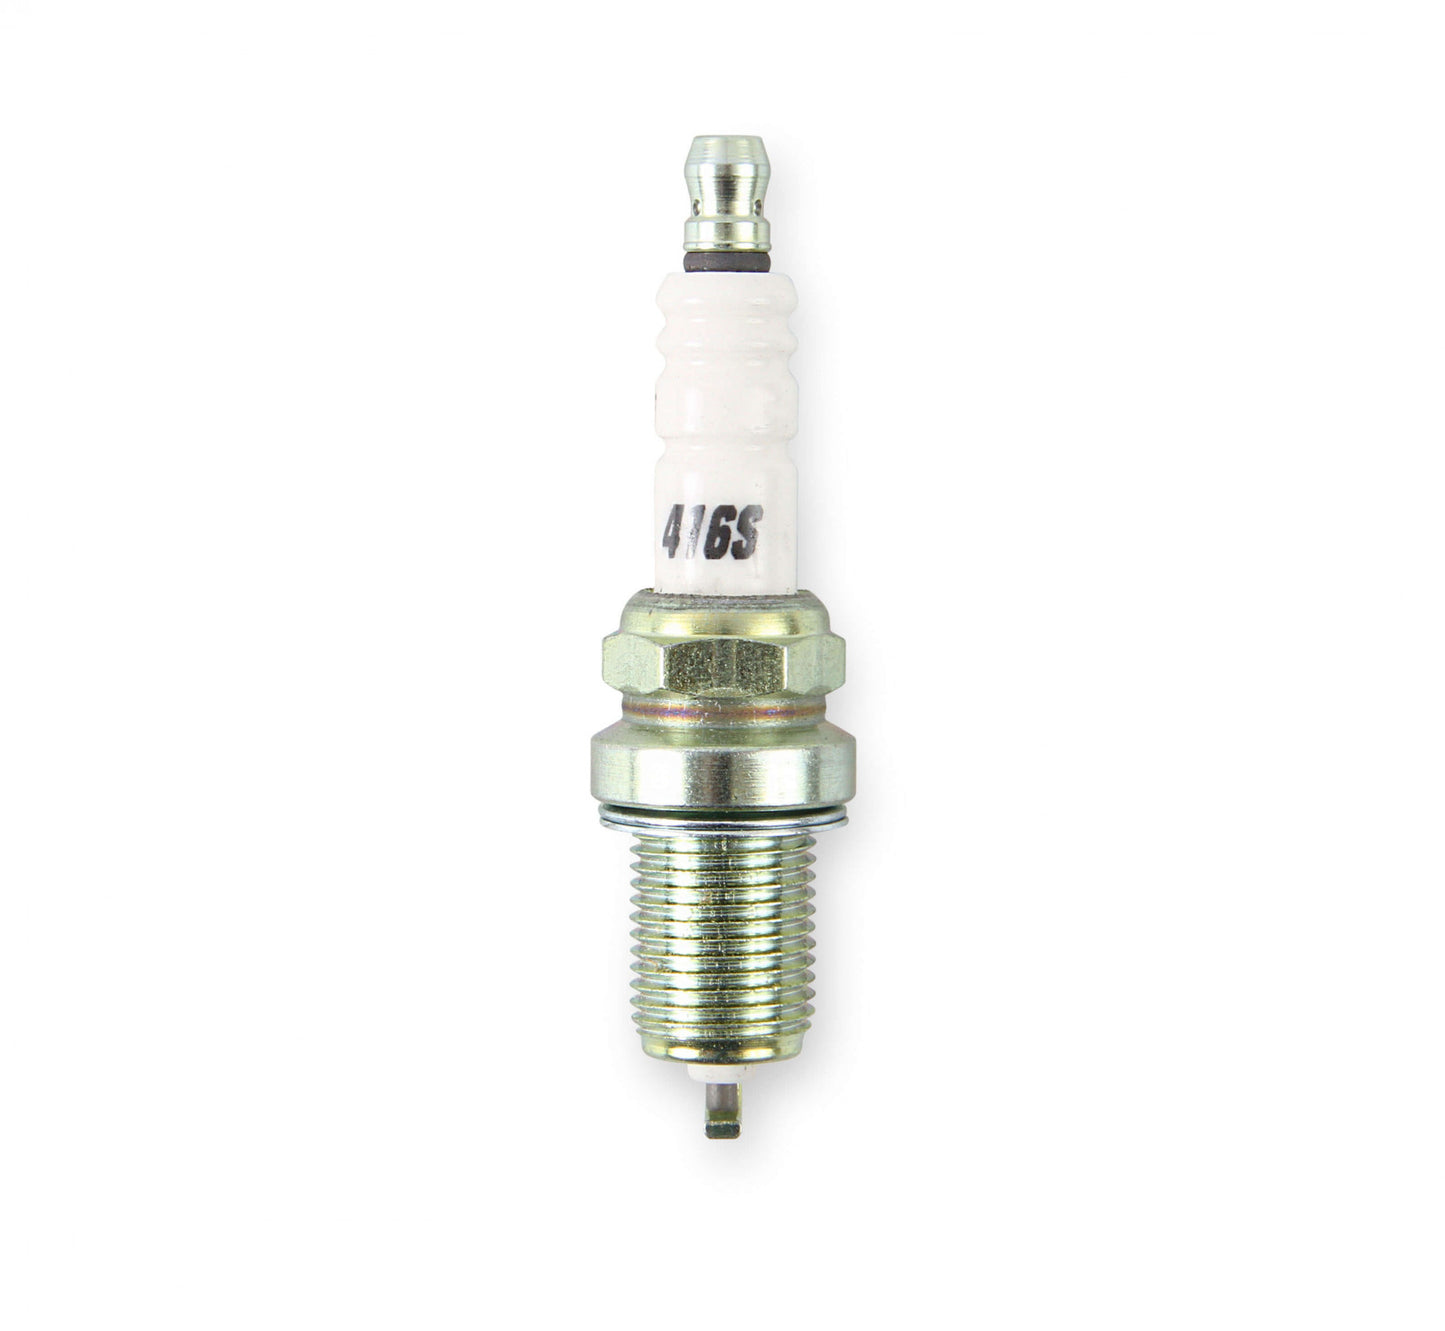 ACCEL HP Copper Spark Plug - Shorty ACC-10416S-4 0416S-4